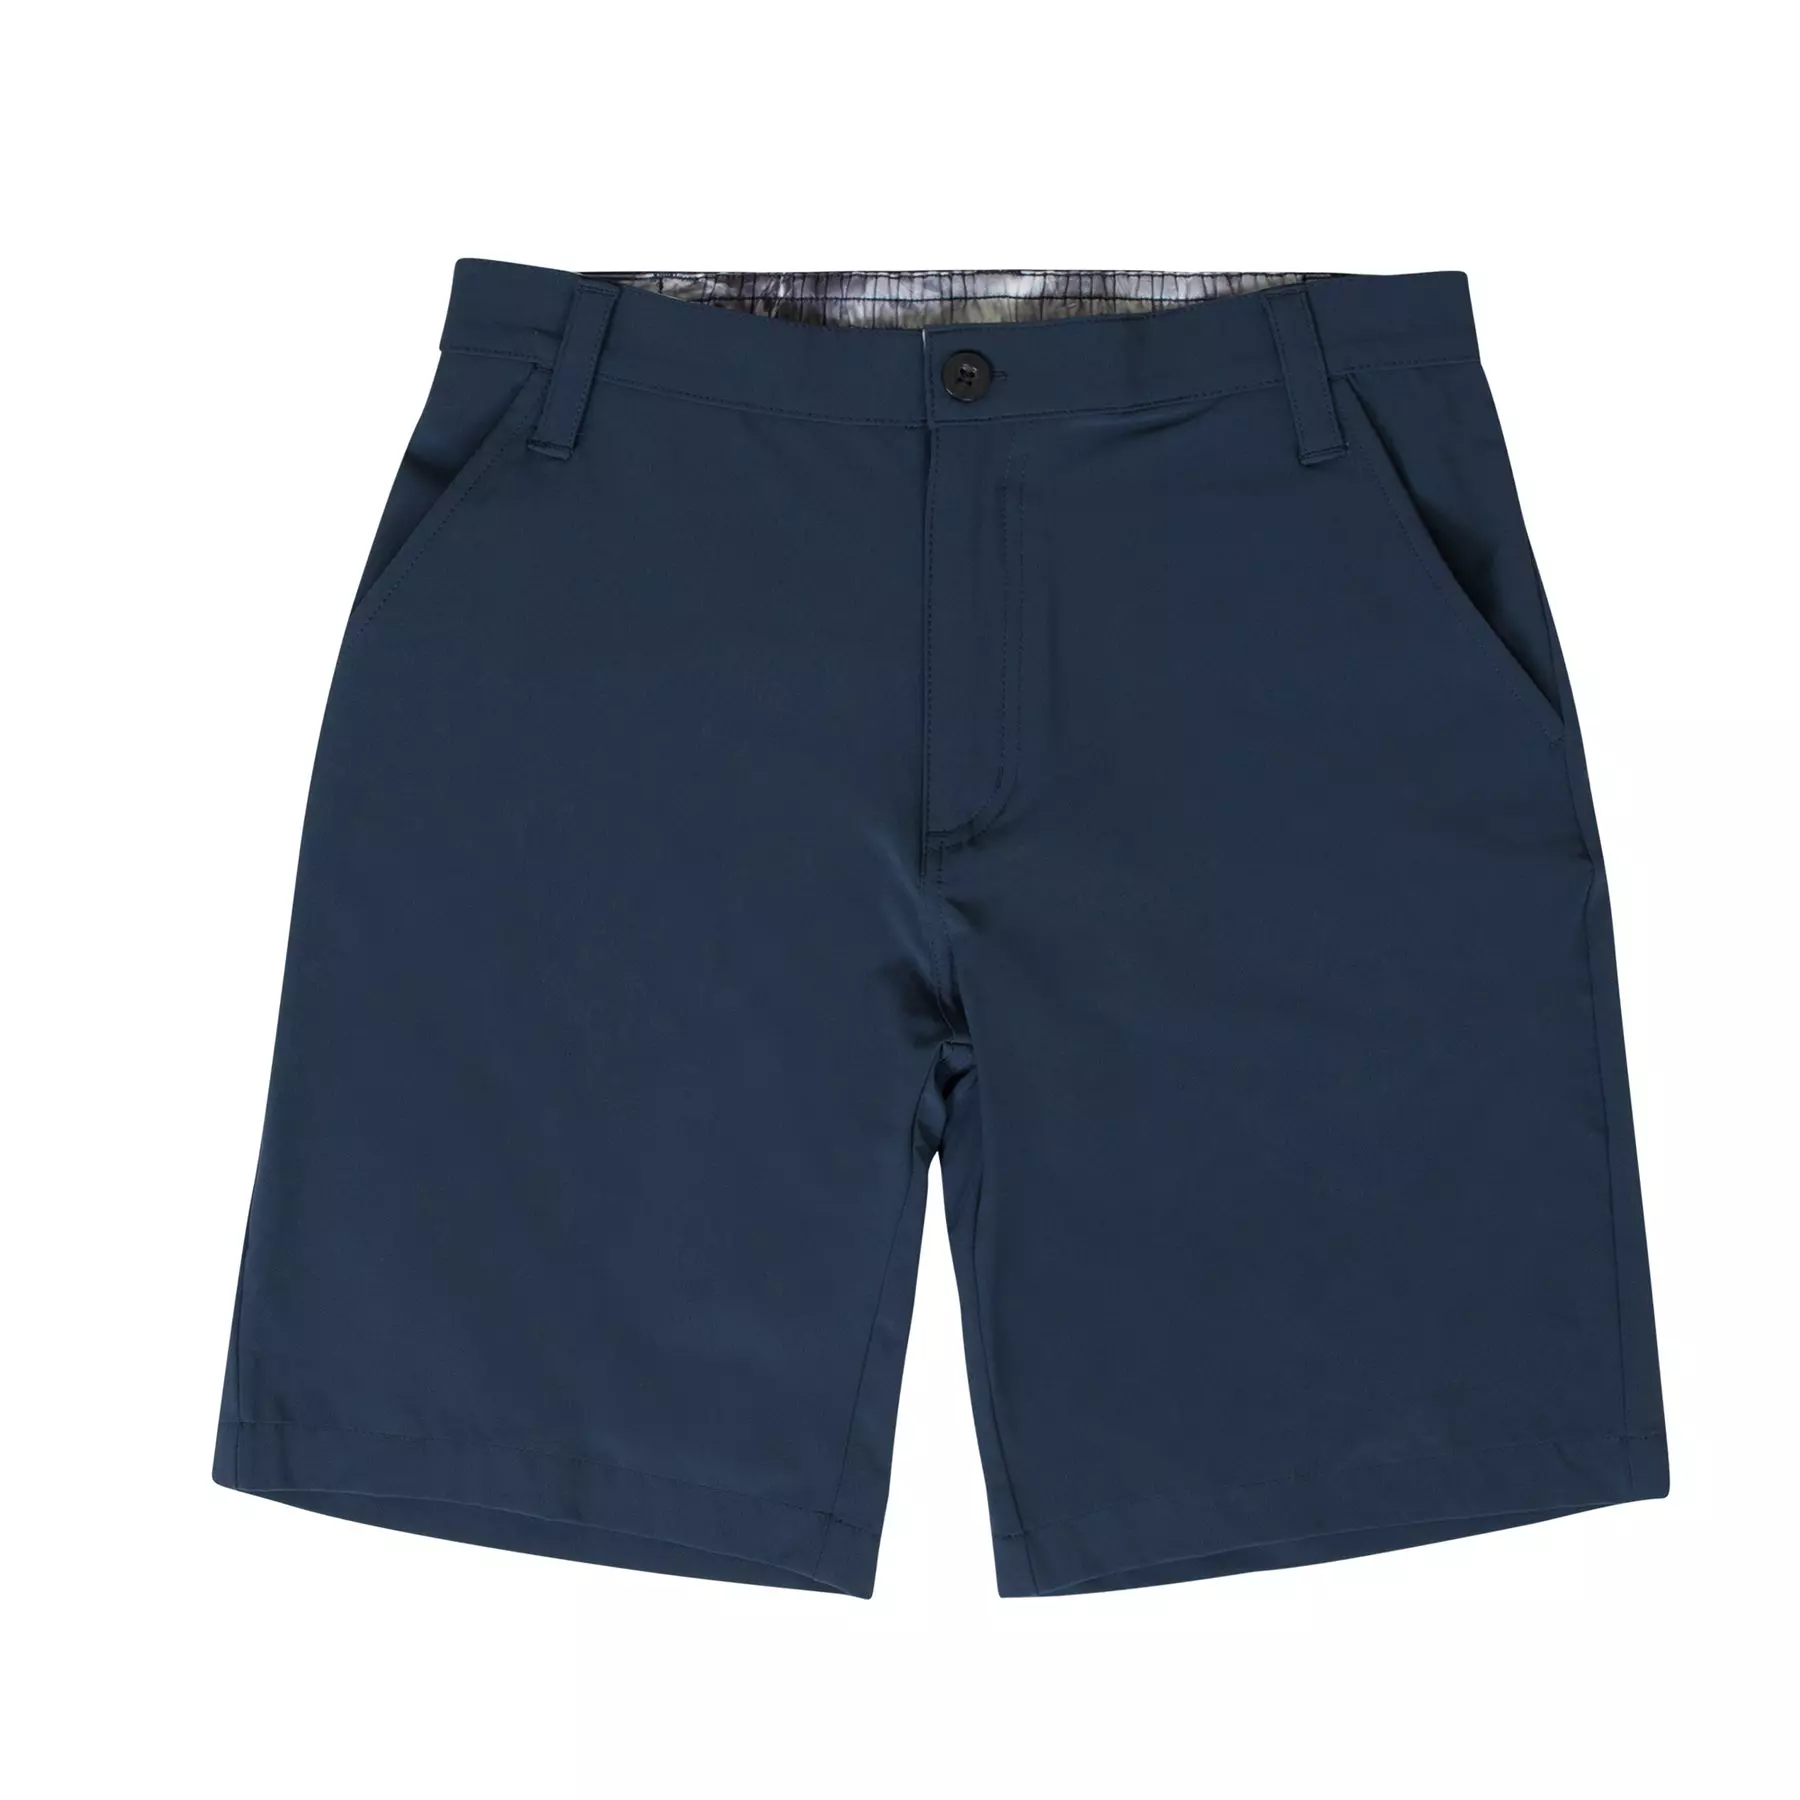 13 Best Golf Shorts For Men To Stay Comfortable In 2023, Expert-Reviewed